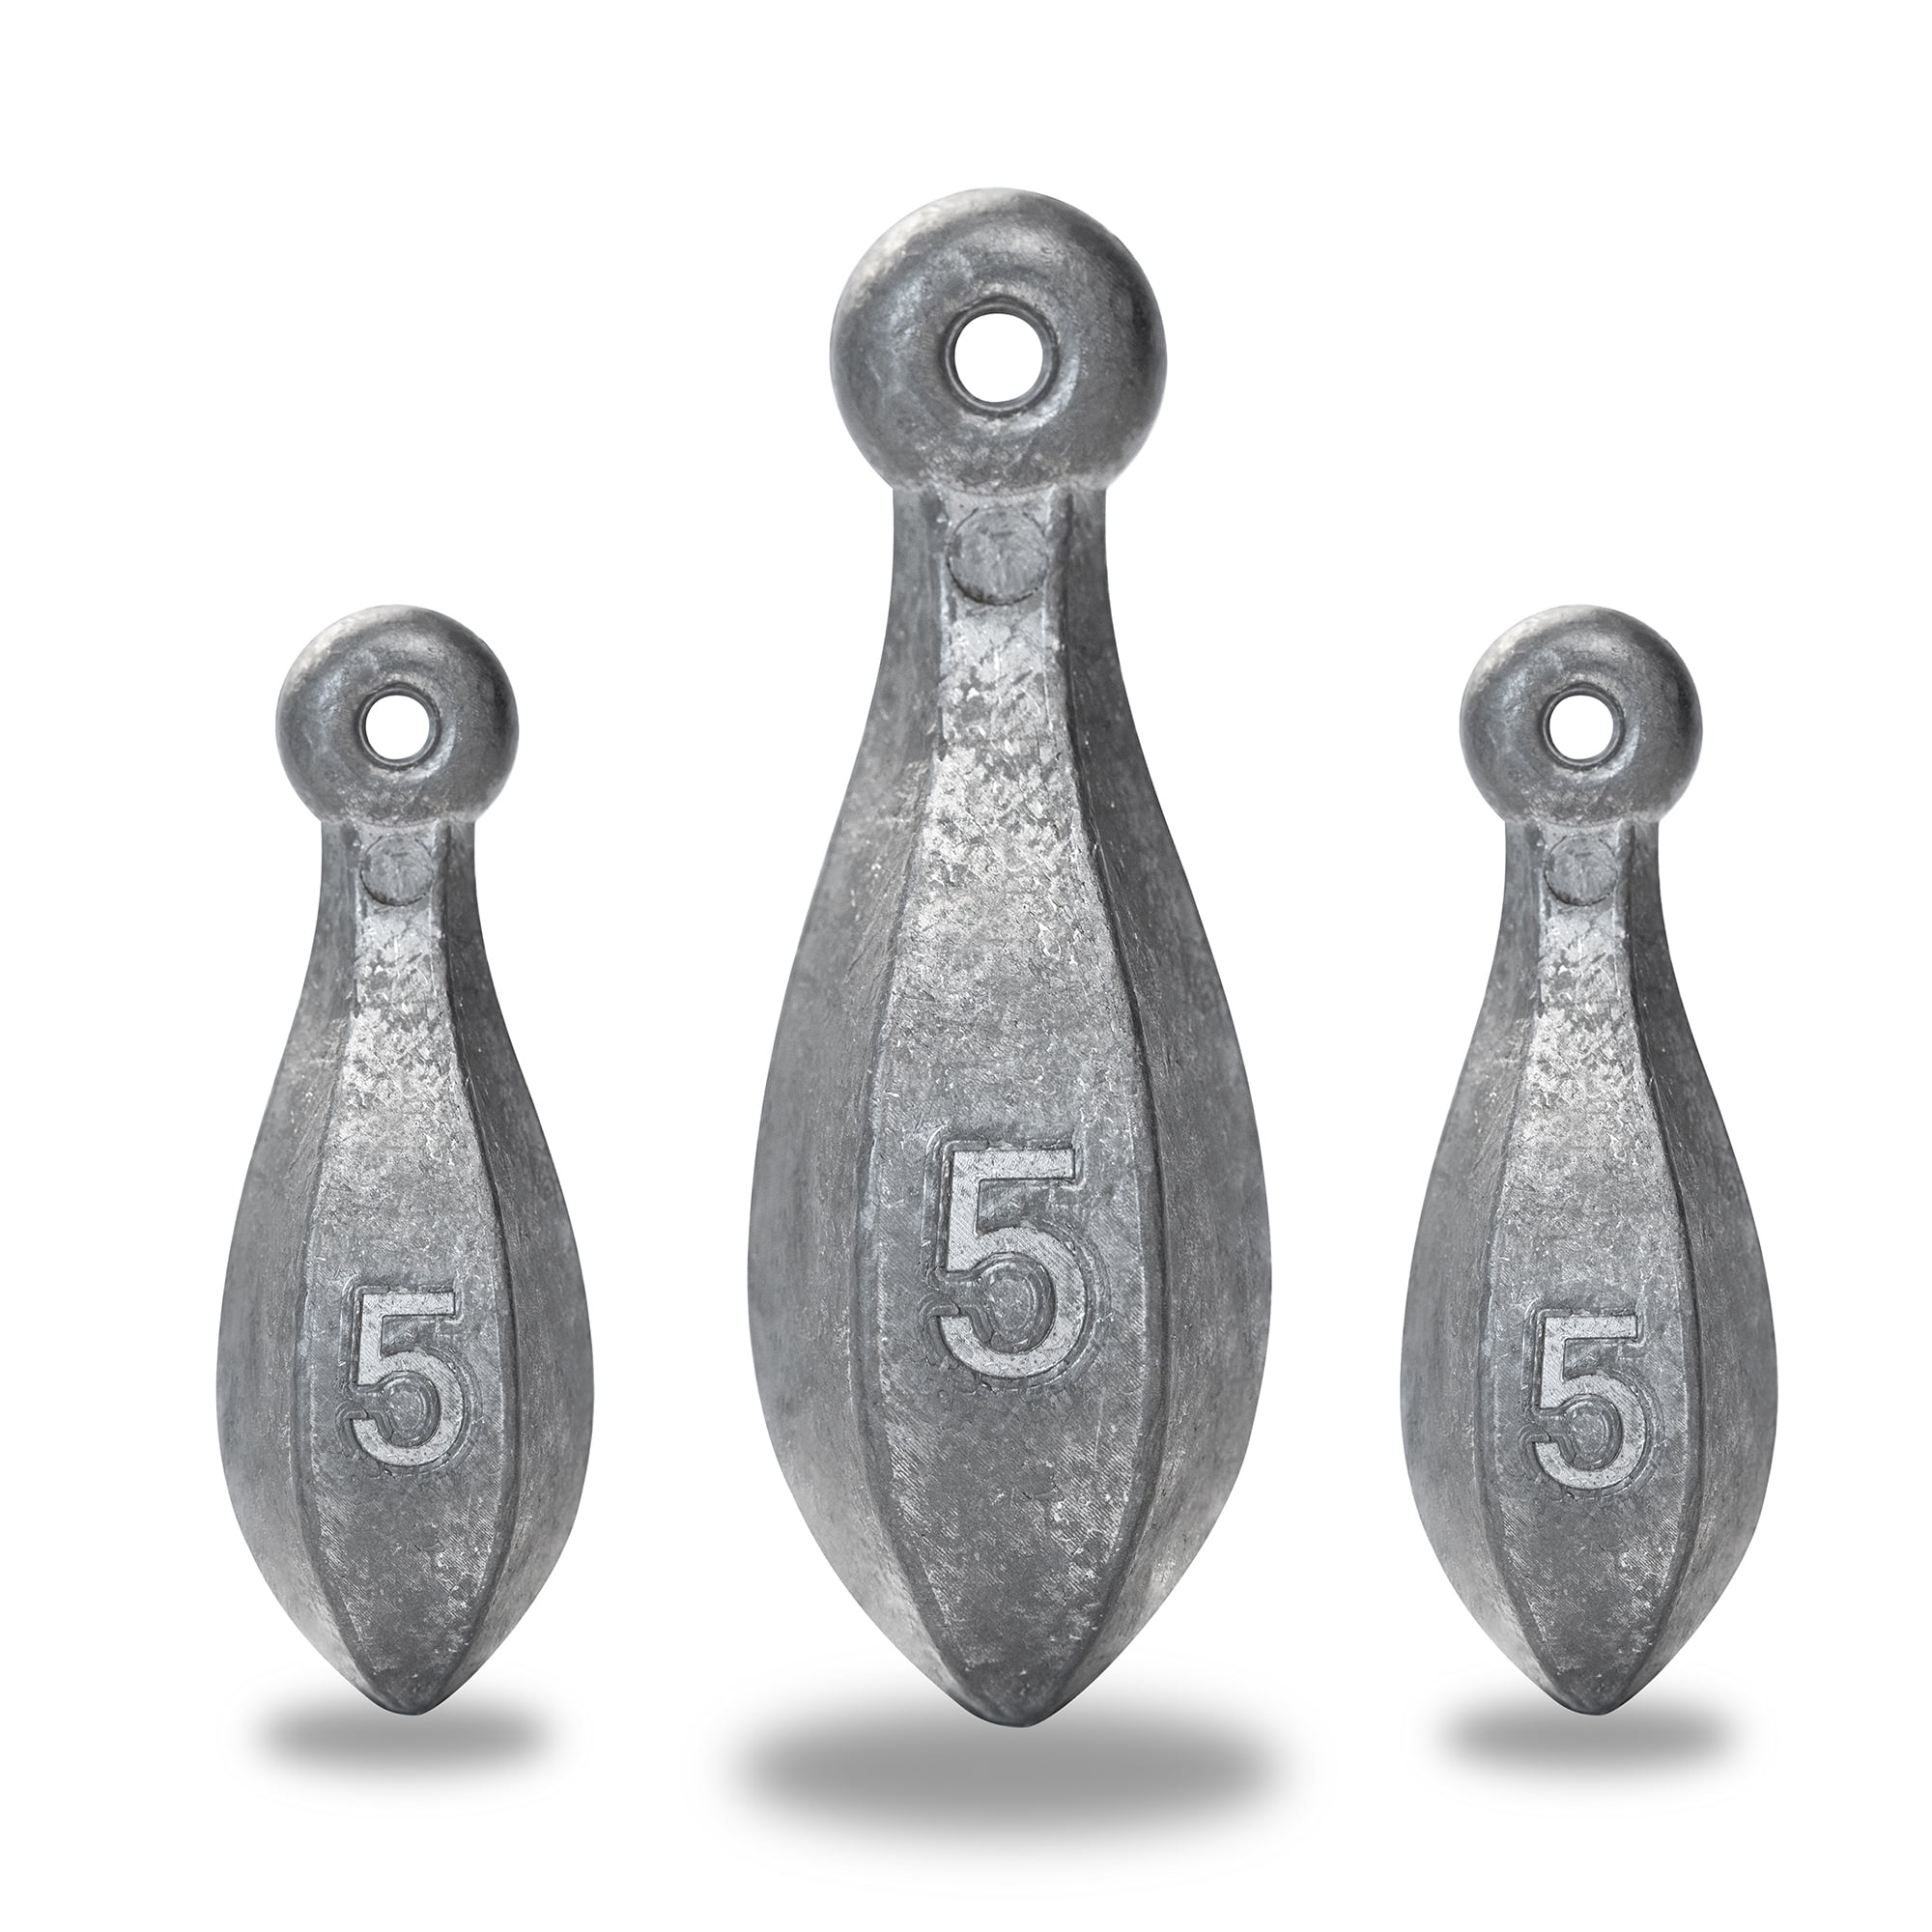  S & J's TACKLE BOX 1 oz Lead Bank Weights - 10 PER Pack :  Fishing Sinkers : Sports & Outdoors